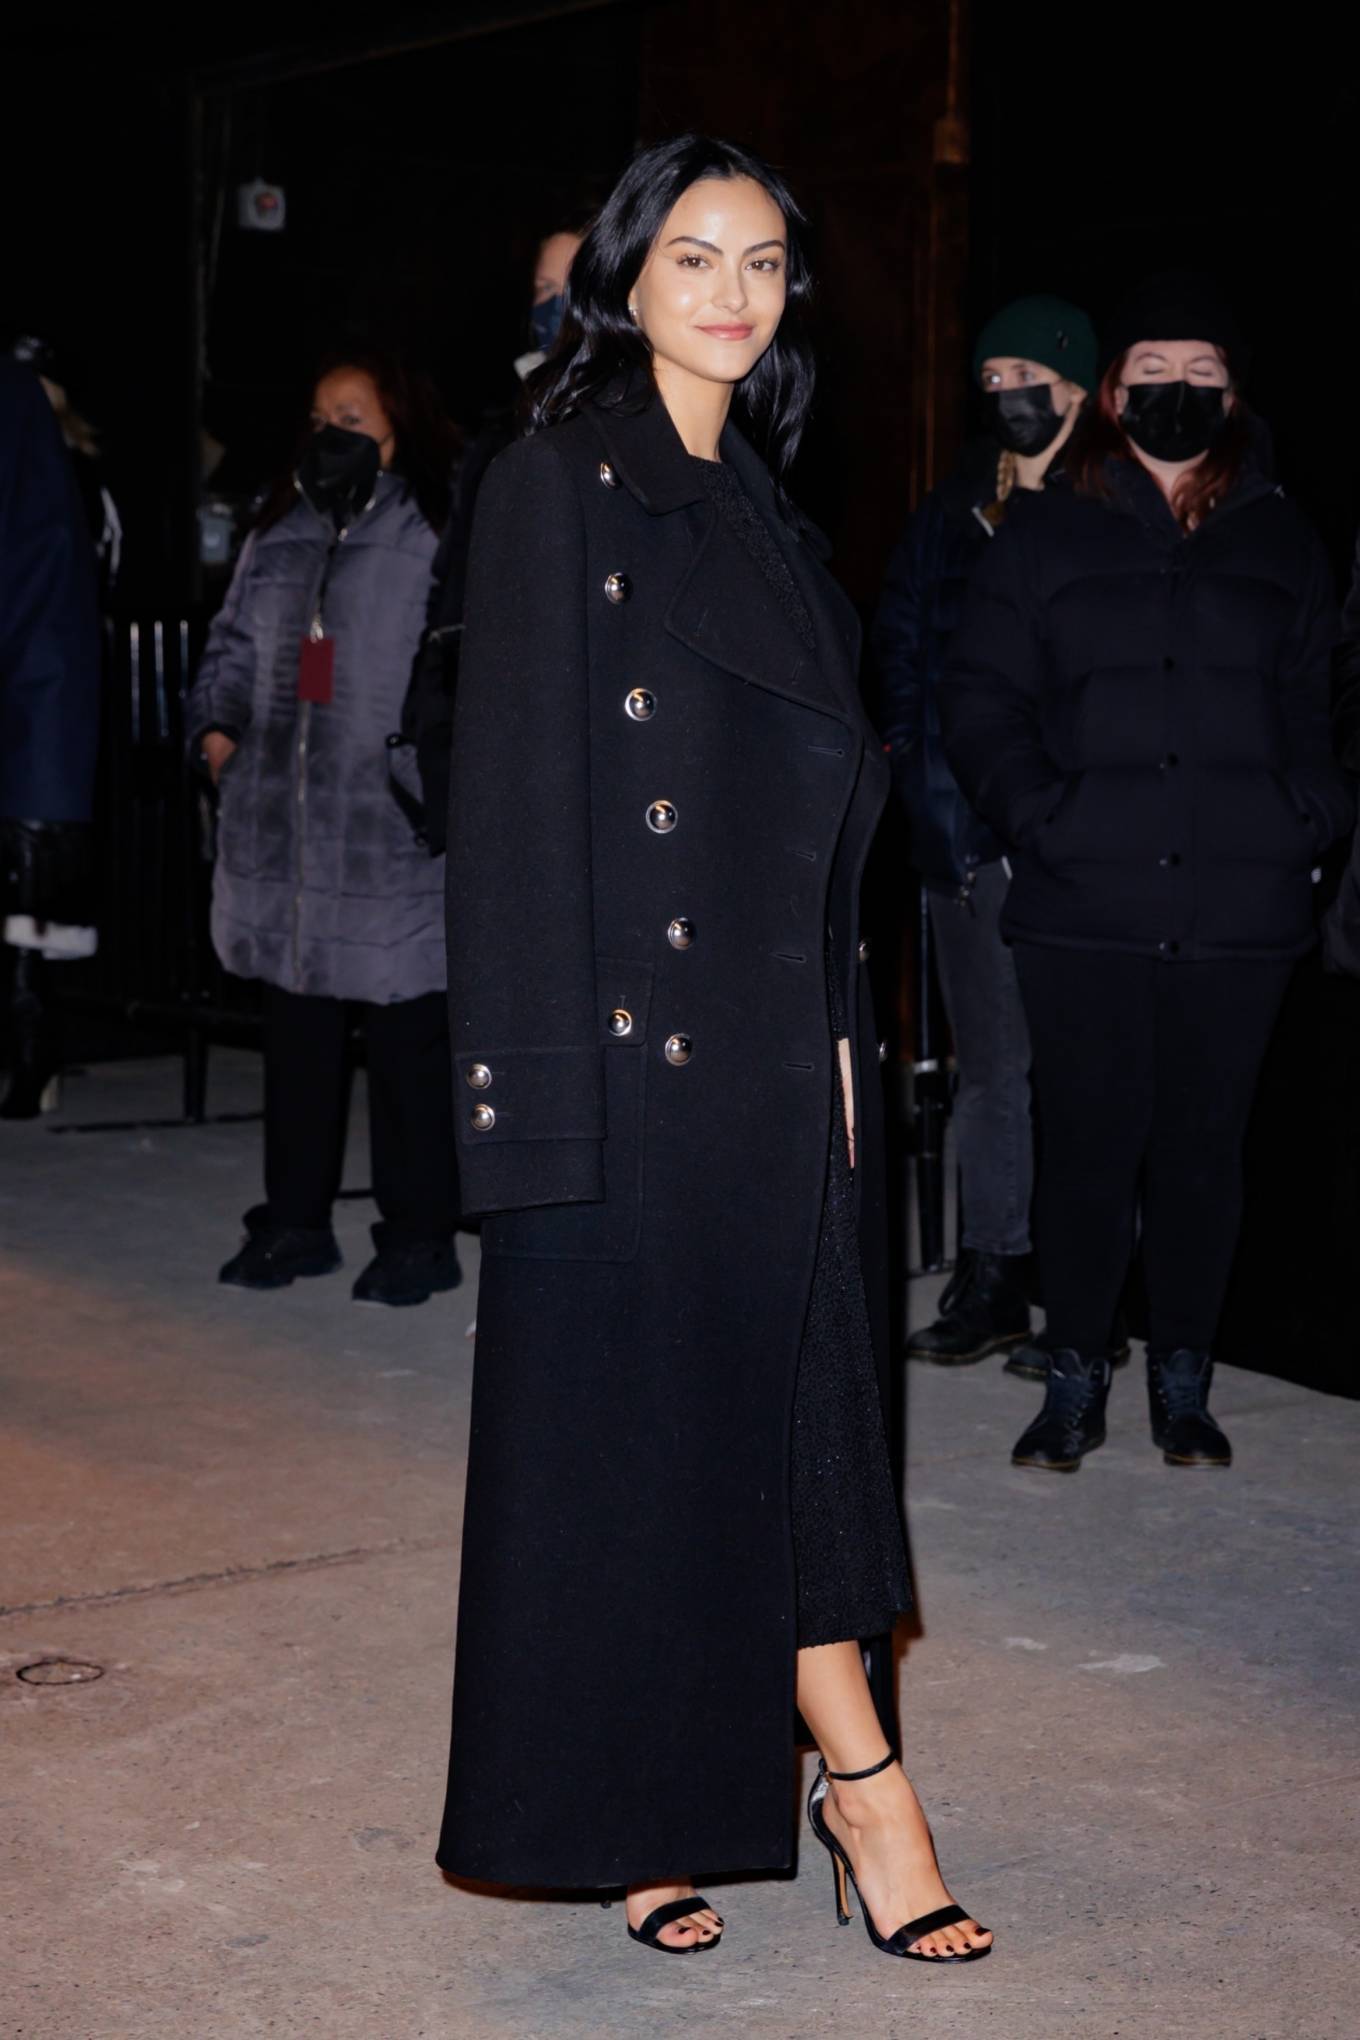 Camila Mendes 2022 : Camila Mendes – In all black arrives to the Michael Kors fashion show during NYFW-03